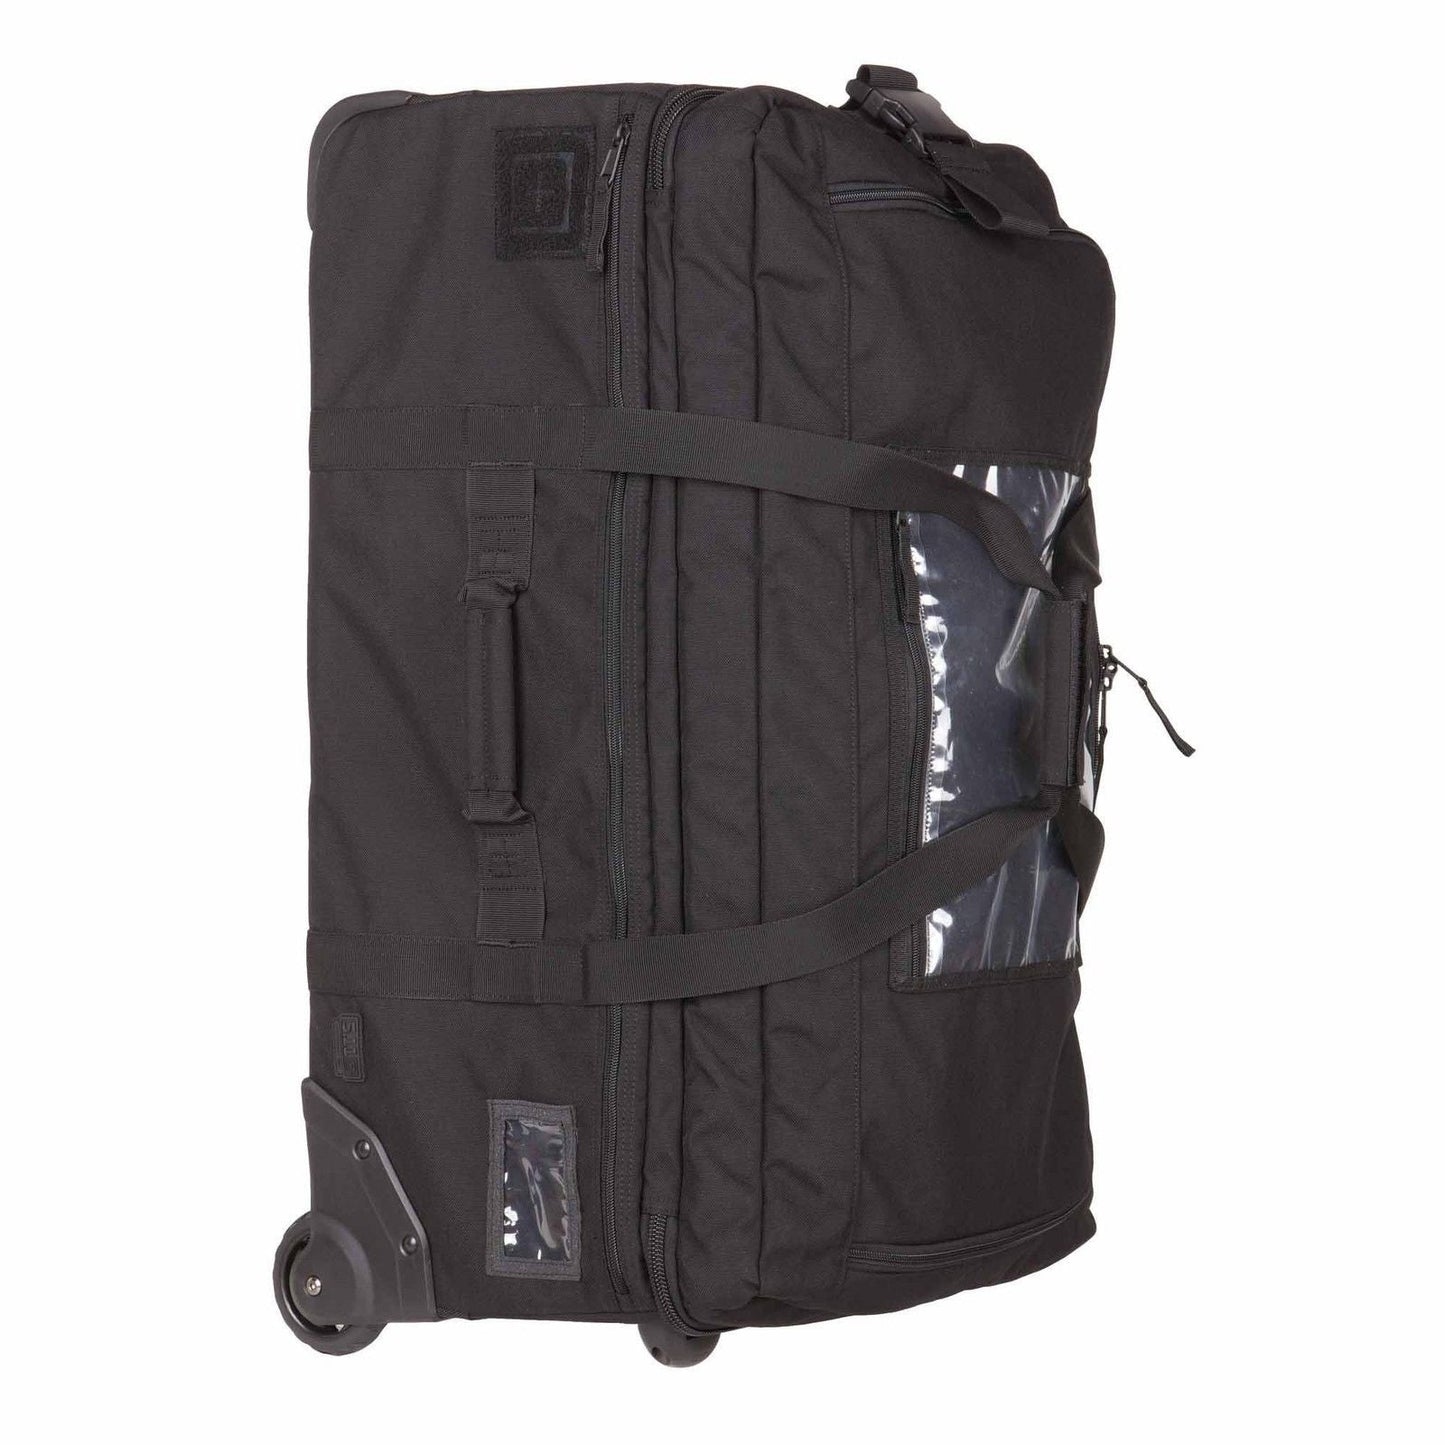 5.11 Black Mission Ready 2.0 Rolling & Stand Up Frame Tactical Travel Bag Pack